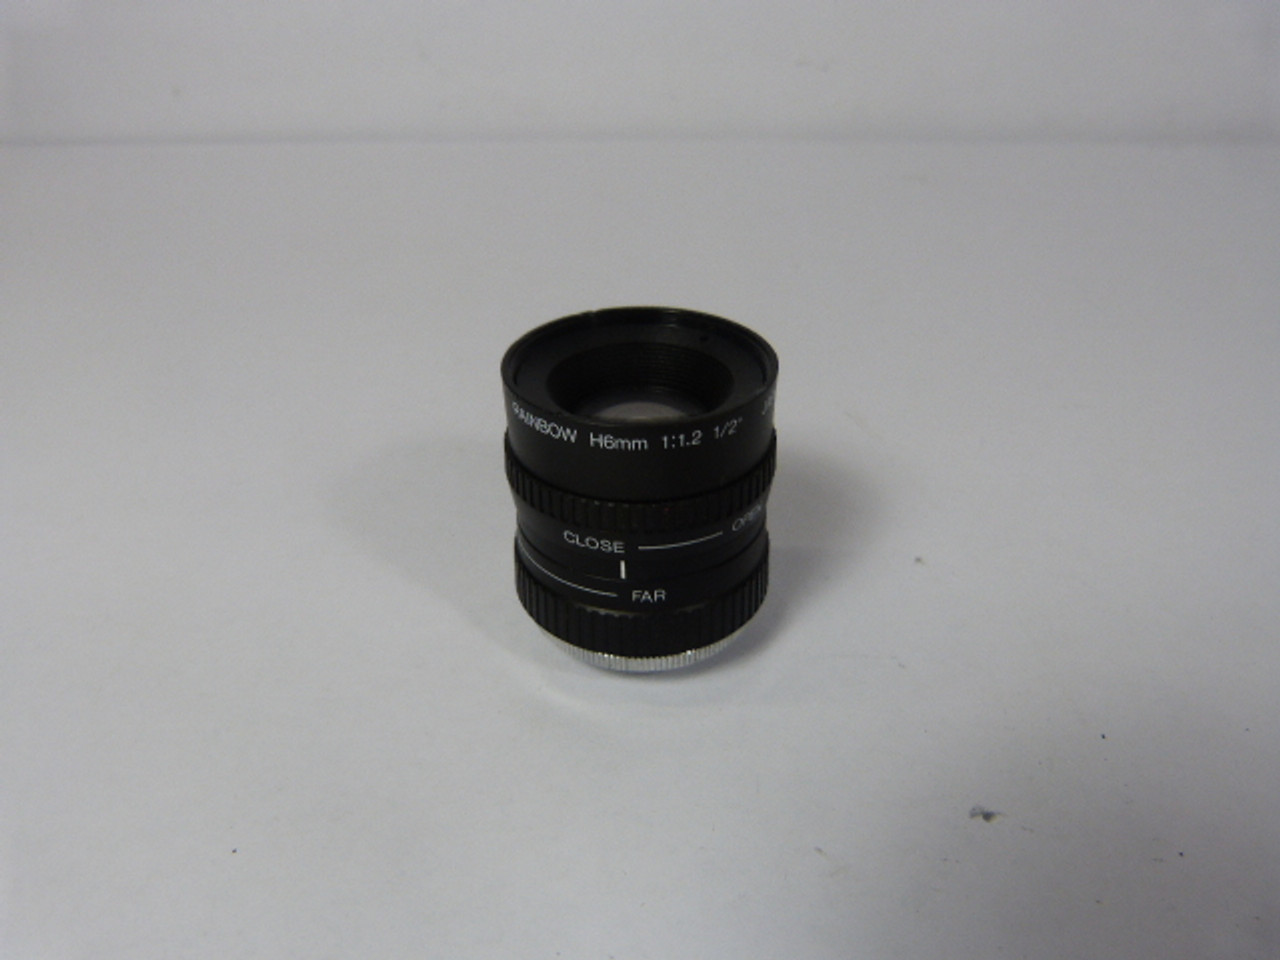 Rainbow H6mm Security Camera Lens 1:1.2 1/2Inch USED